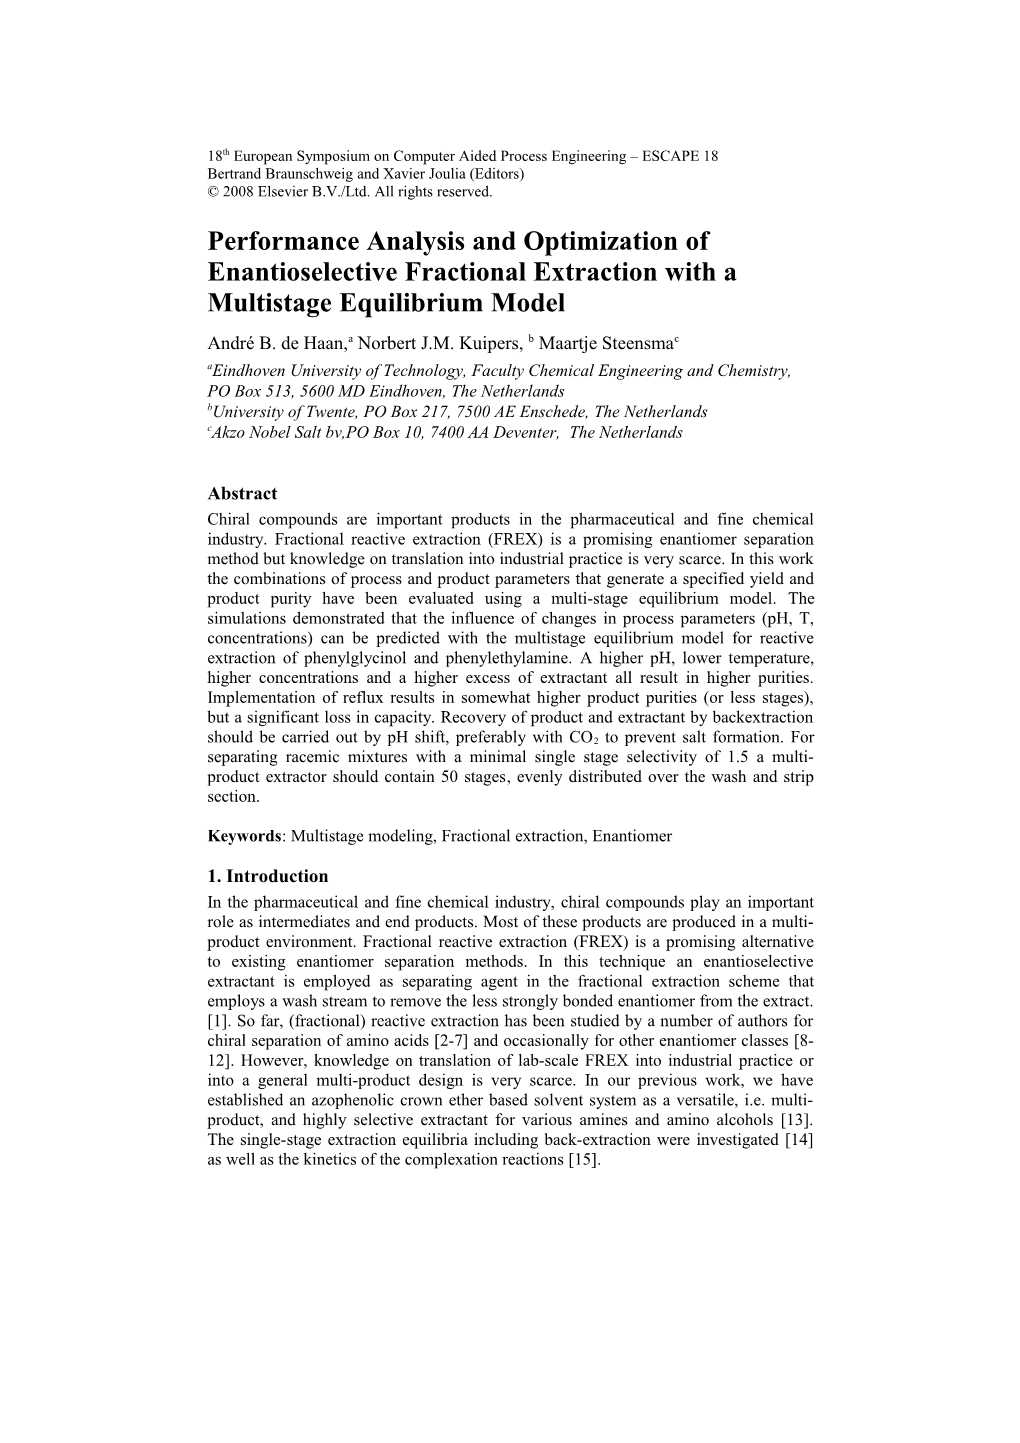 Performance Analysis and Optimization of Enantioselctive Fractional 1